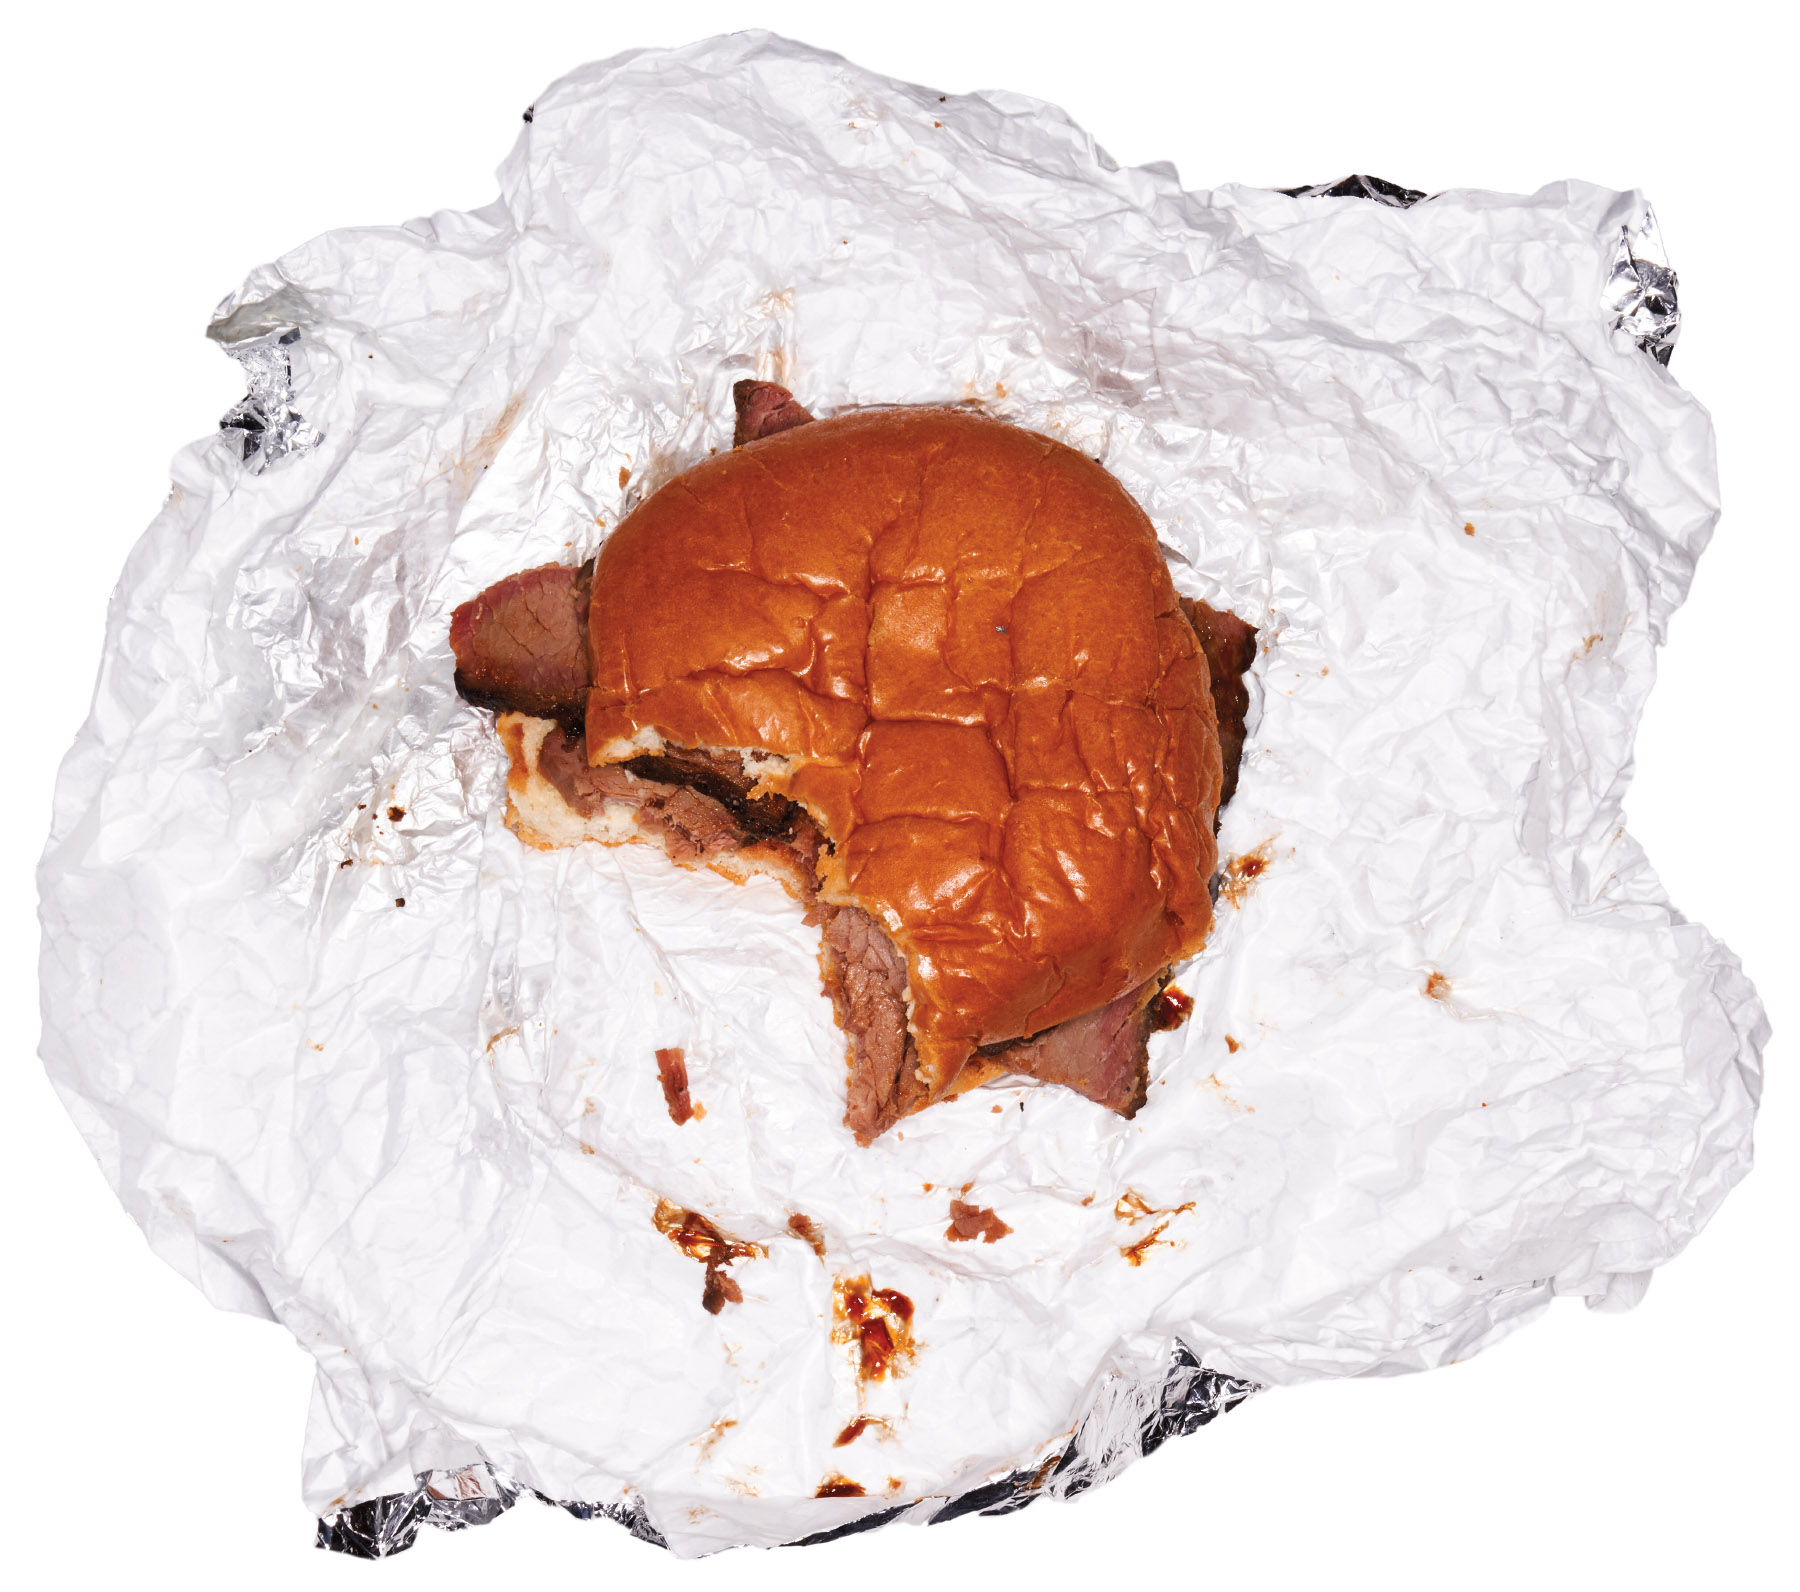 An overhead view of a brisket sandwich on a white wrapper